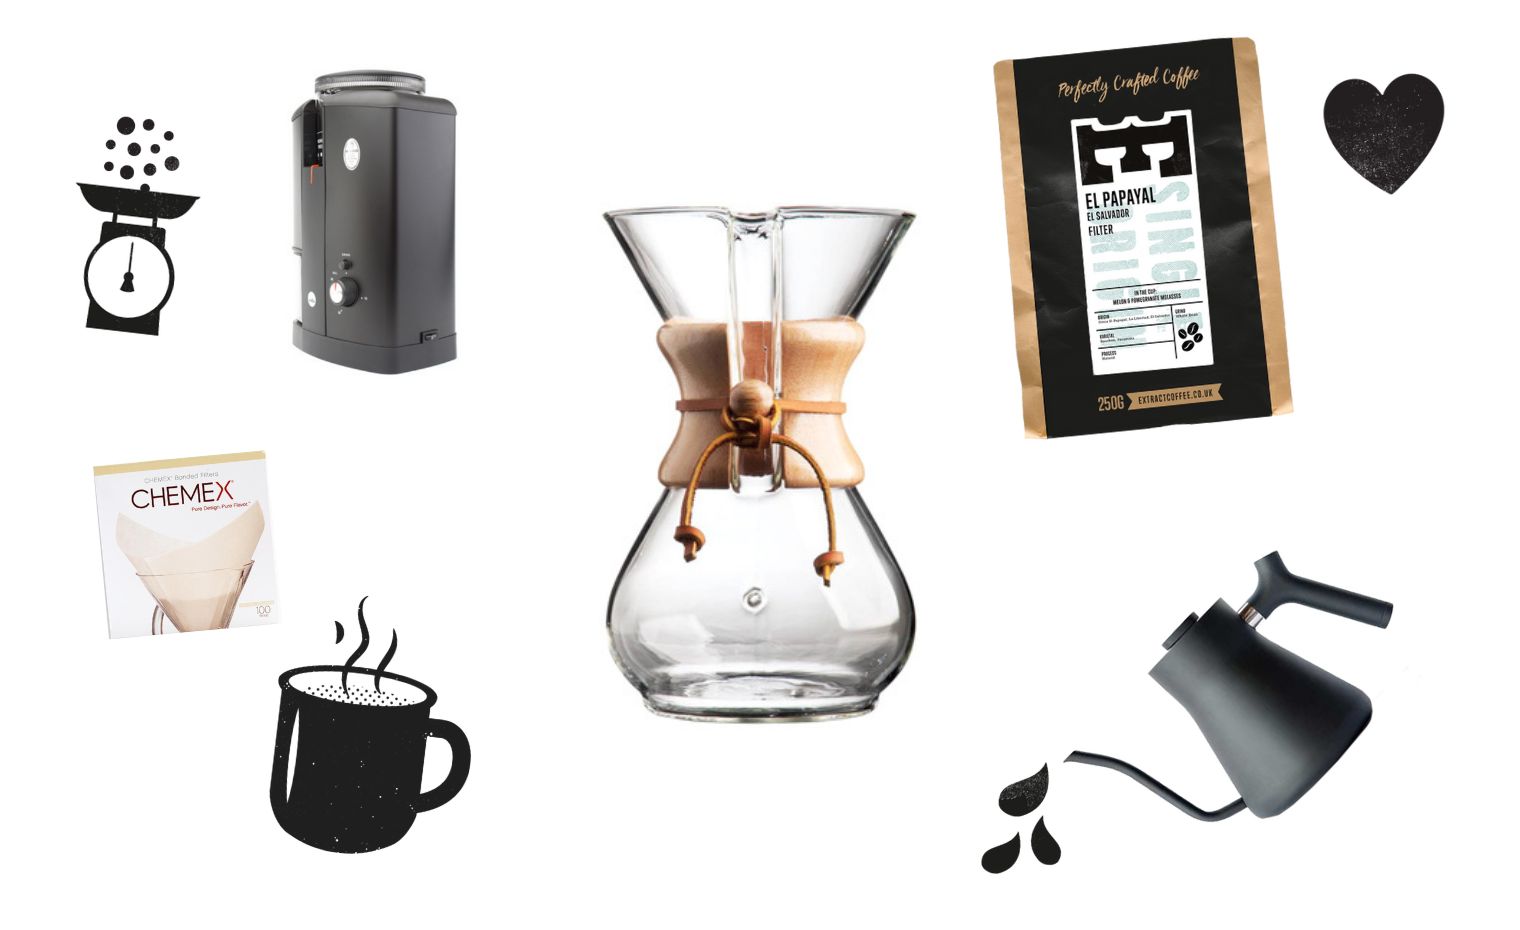 Extract Coffee Roasters Chemex Brew Guide Kit List